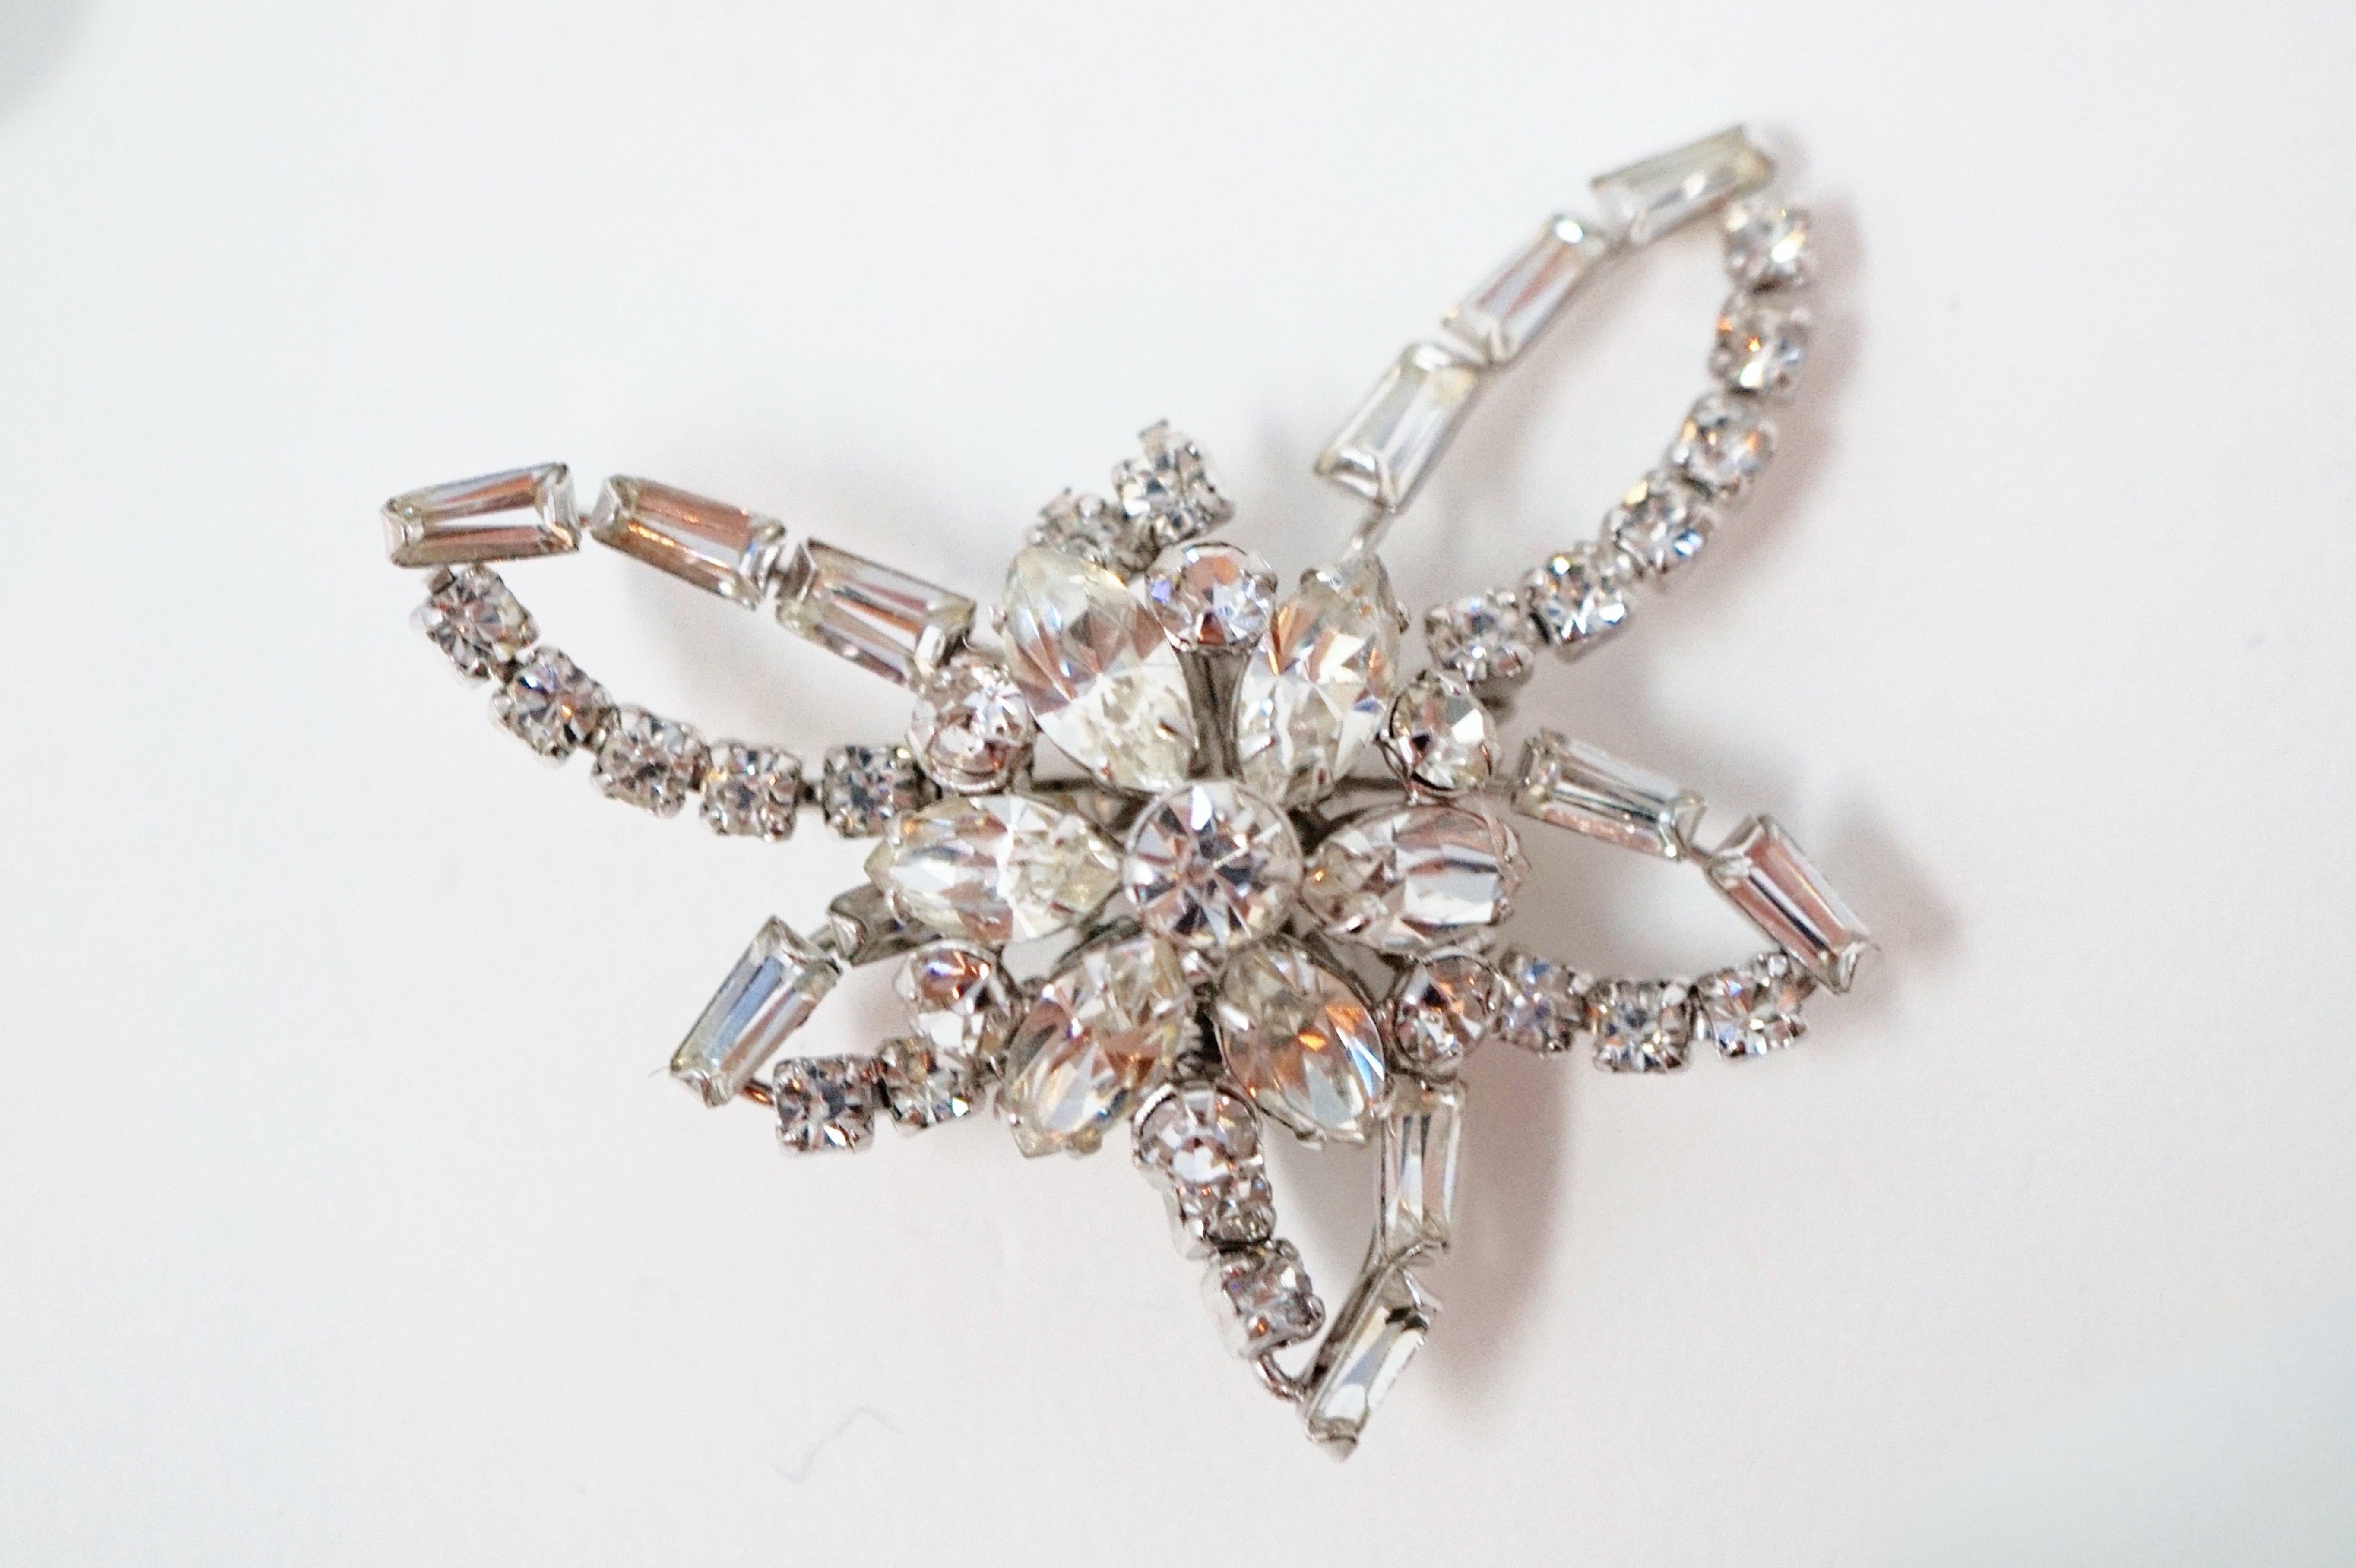 Women's Vintage Sterling Silver and Crystal Floral Brooch by Phyllis, Signed, 1950s